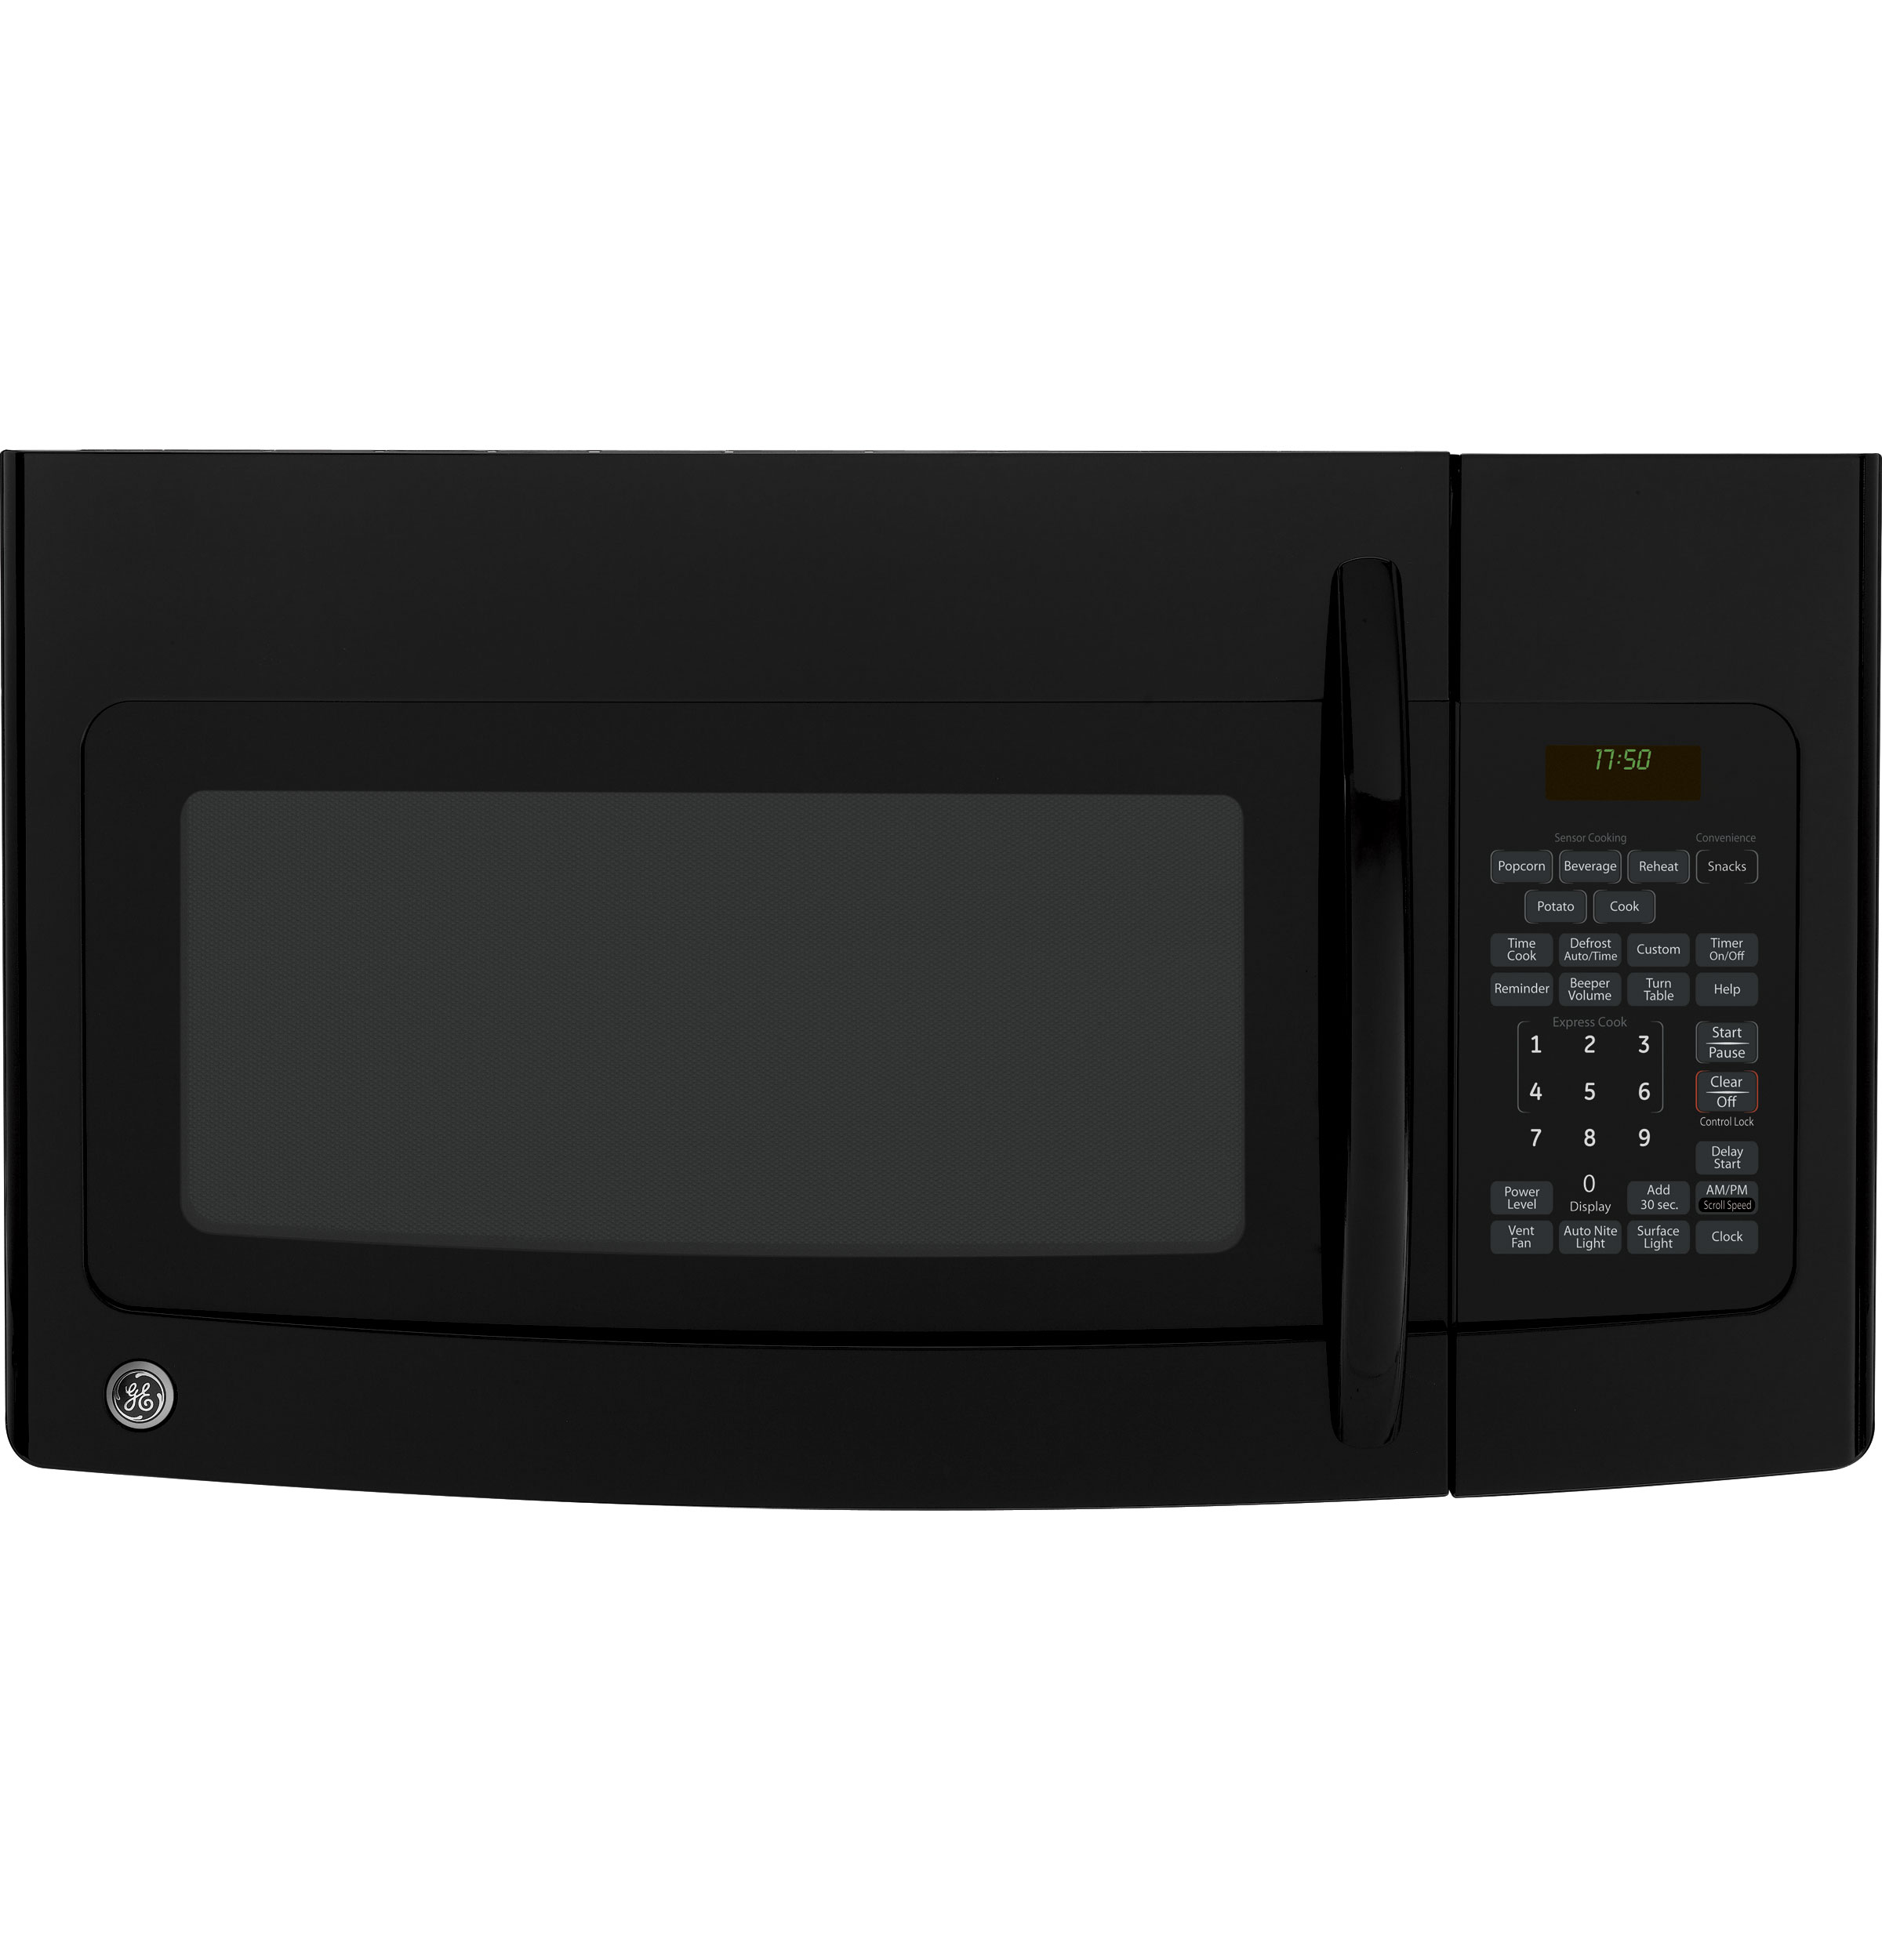 GE Spacemaker® 1.7 Cu. Ft. Over-the-Range Microwave Oven